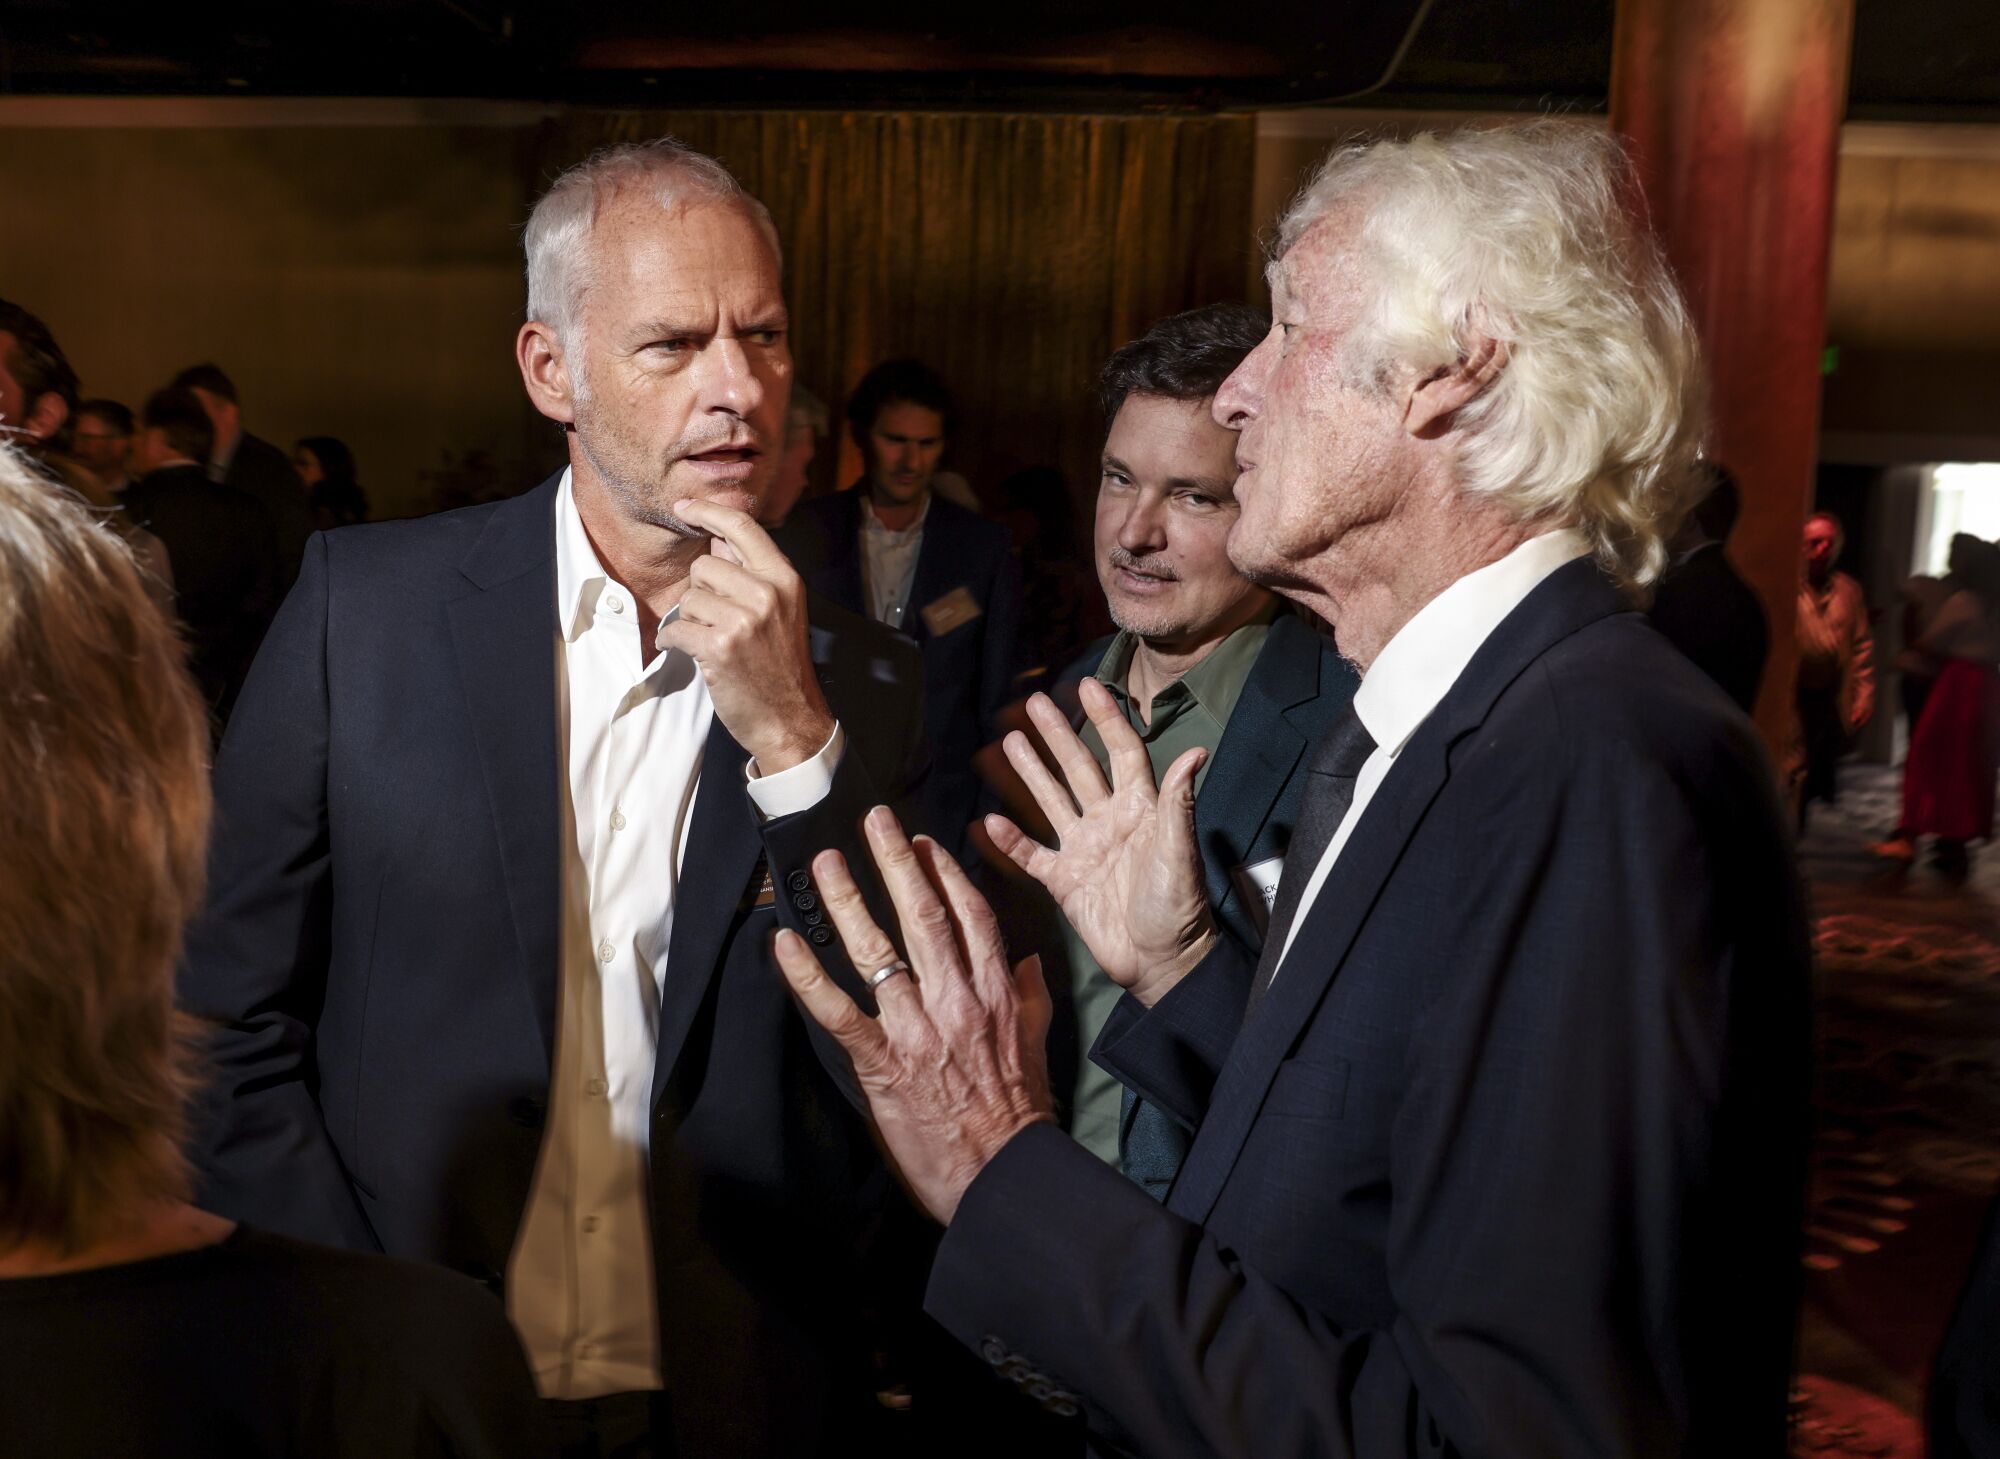 Two gray-haired men talk as another man looks on.